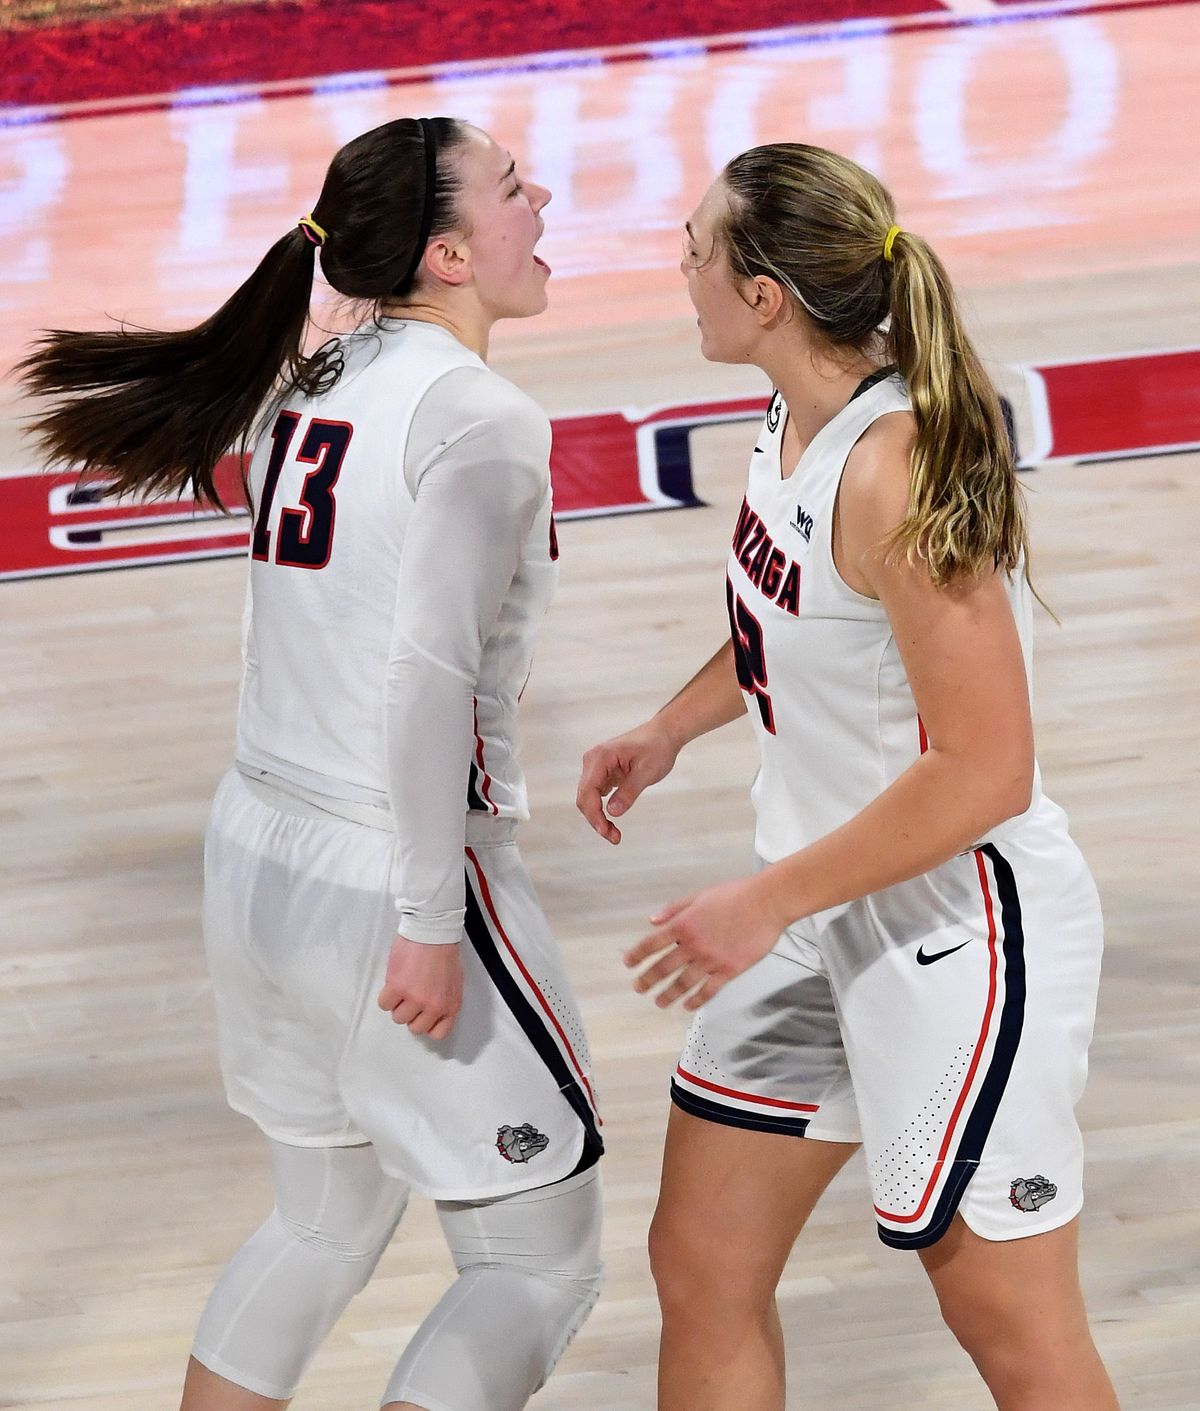 Gonzaga guard Cierra Walker (13) celebrates after hitting one of her two late 3-pointers to help the 19th-ranked Bulldogs hold off BYU 63-56 in West Coast Conference play Tuesday at McCarthey Athletic Center.  (Colin Mulvany/The Spokesman-Review)